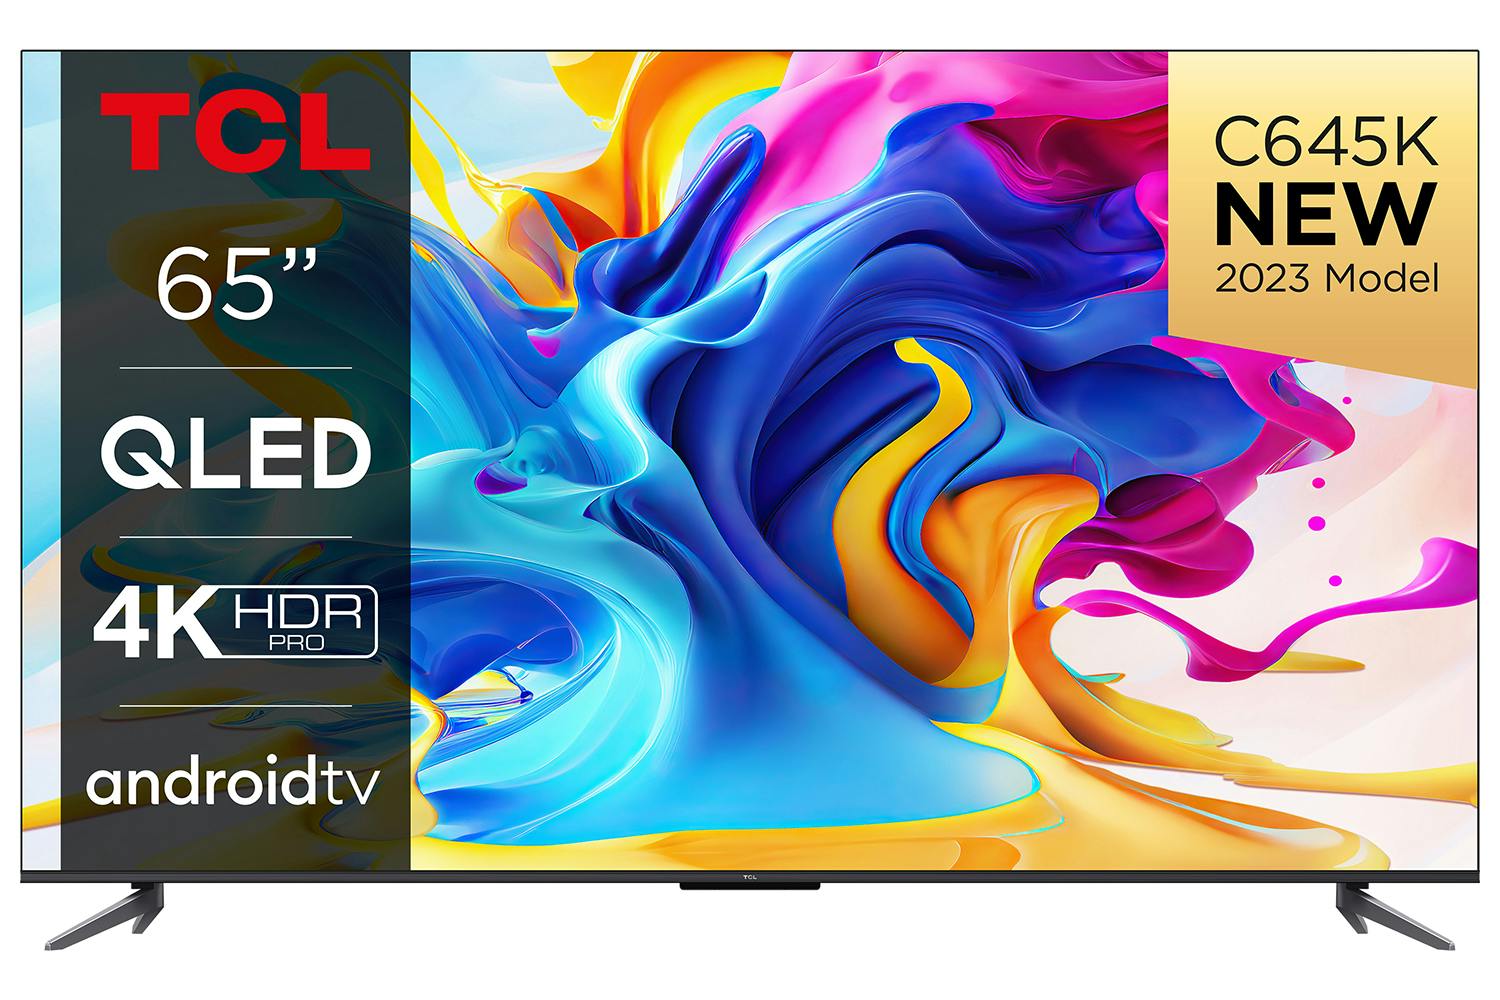 TCL 65" 4K QLED Android Smart TV | 65C645K